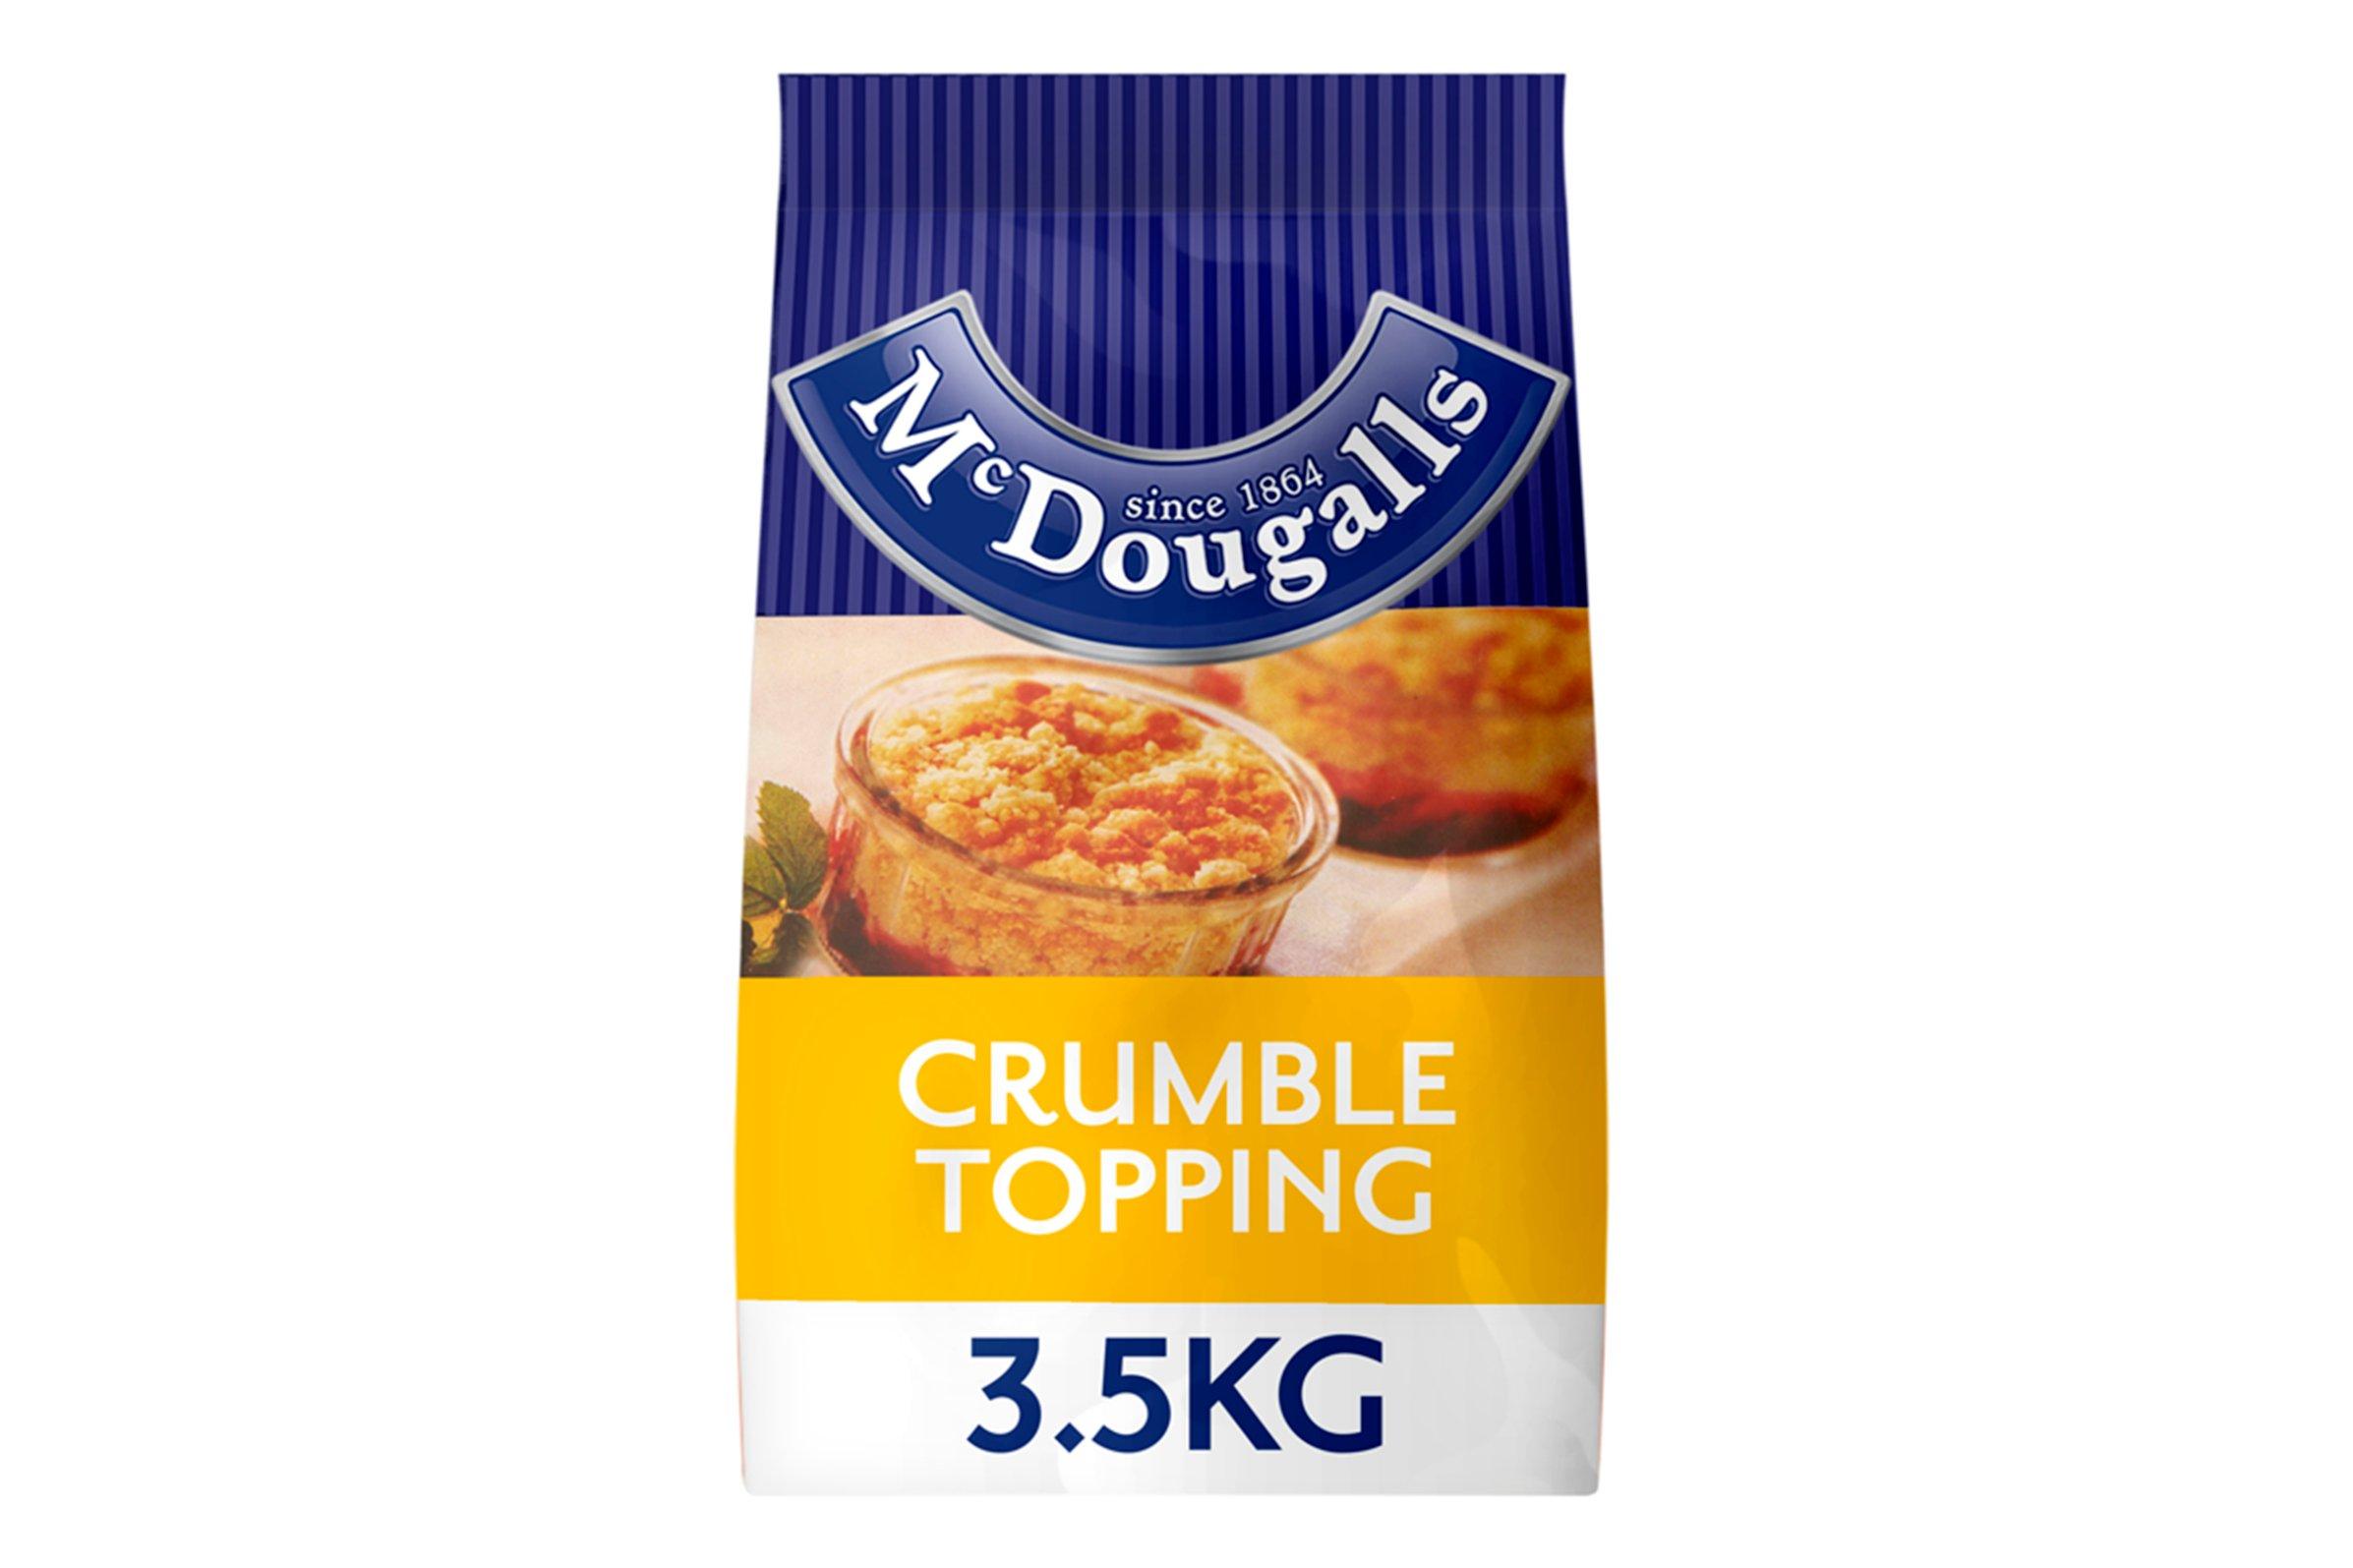 McDougalls Crumble Topping Mix